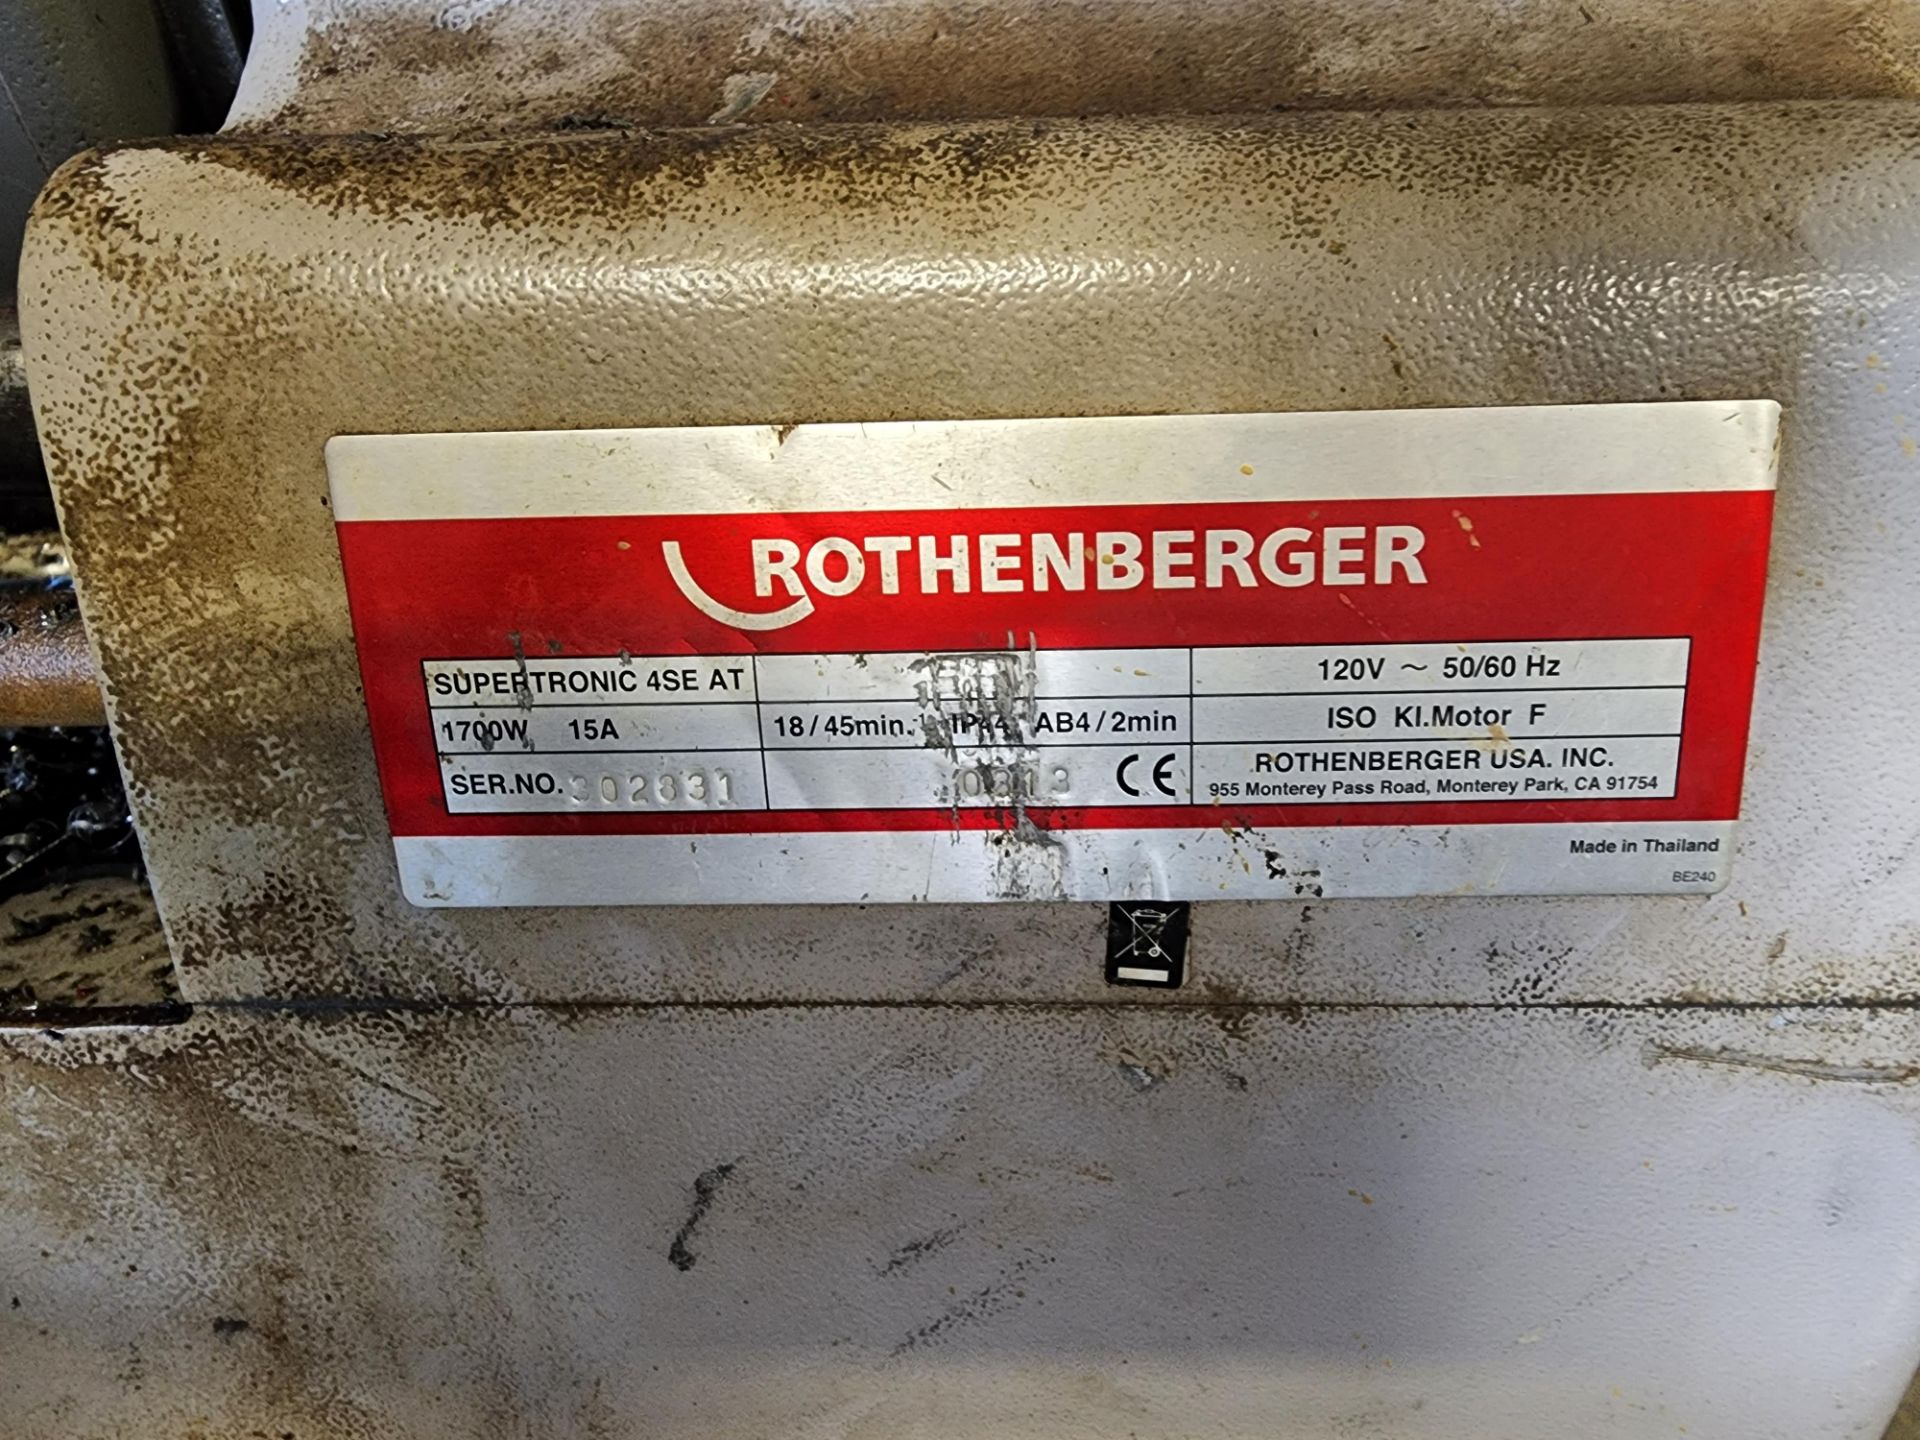 Rothenberger Supertronic 45E AT Power Pipe Threader - Image 5 of 6